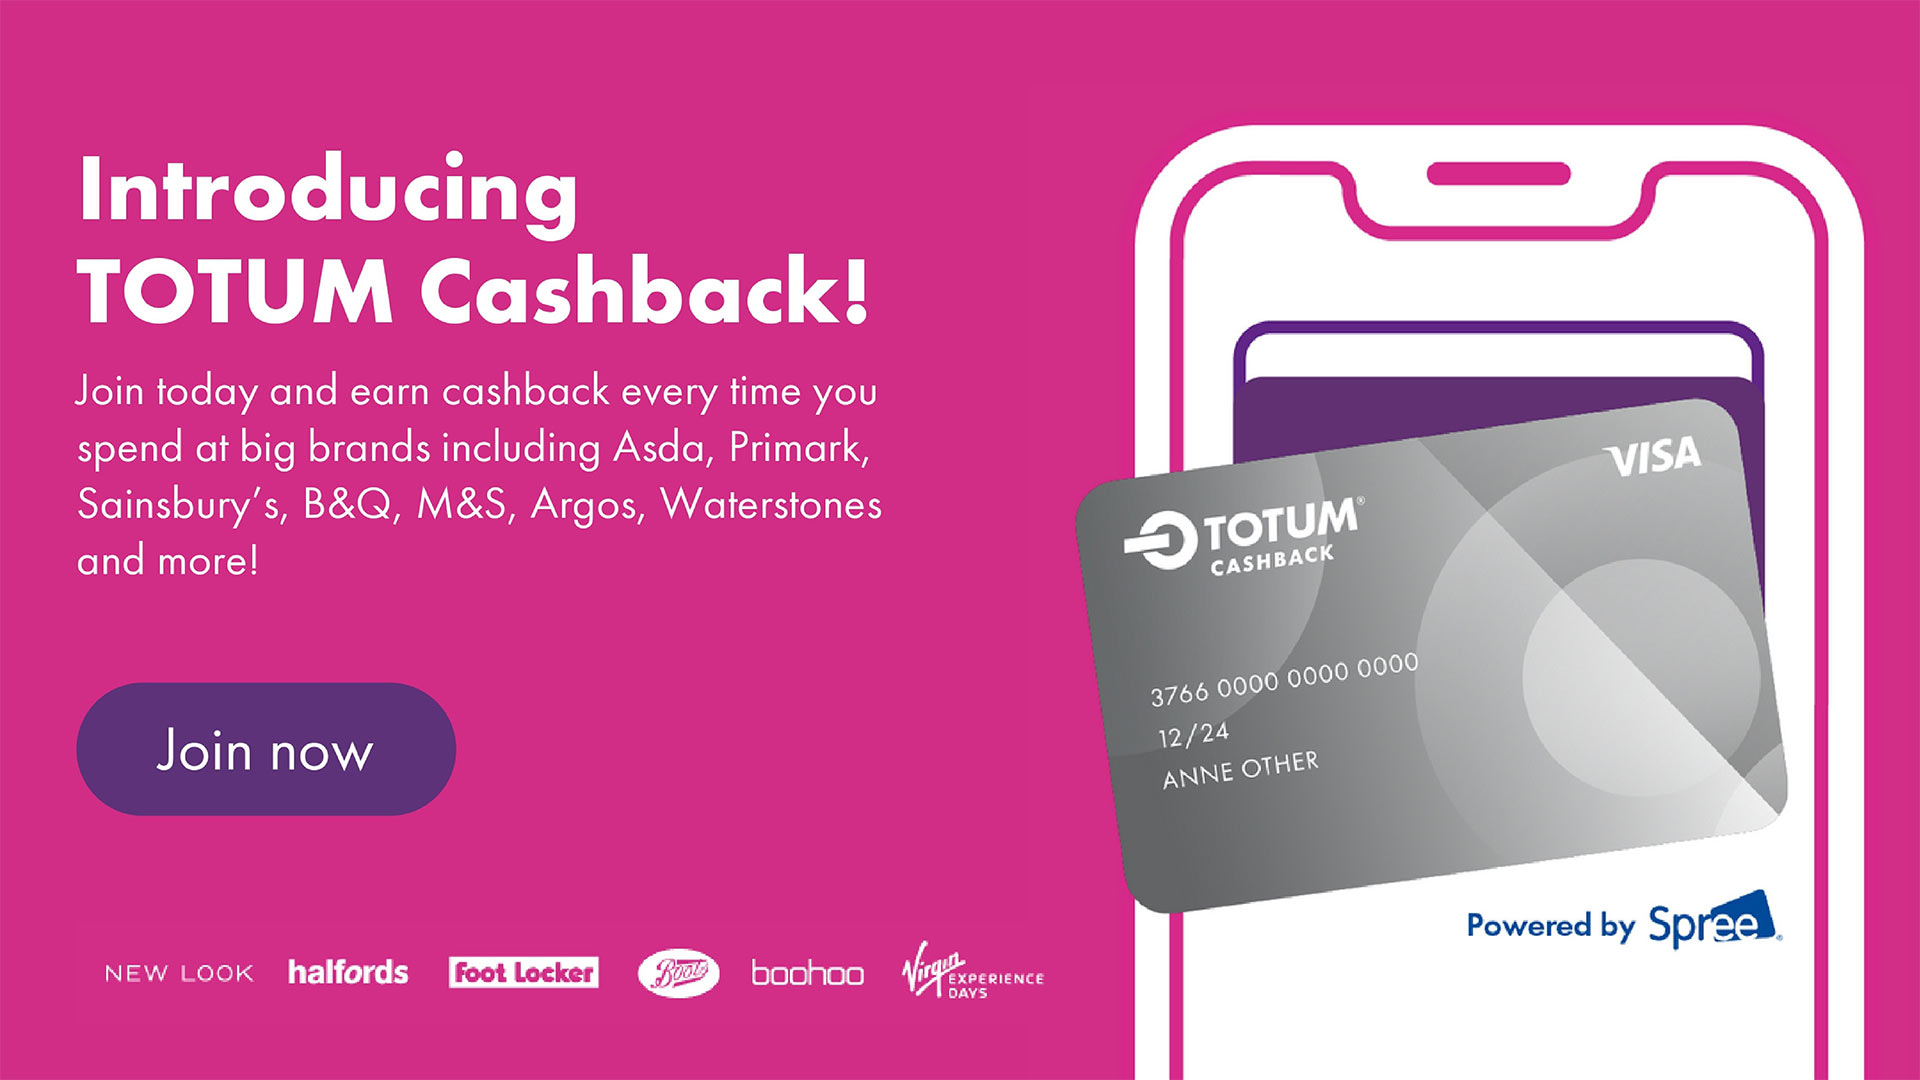 JOIN TODAY & START EARNING CASHBACK AT TOP BRANDS IN-STORE AND ONLINE